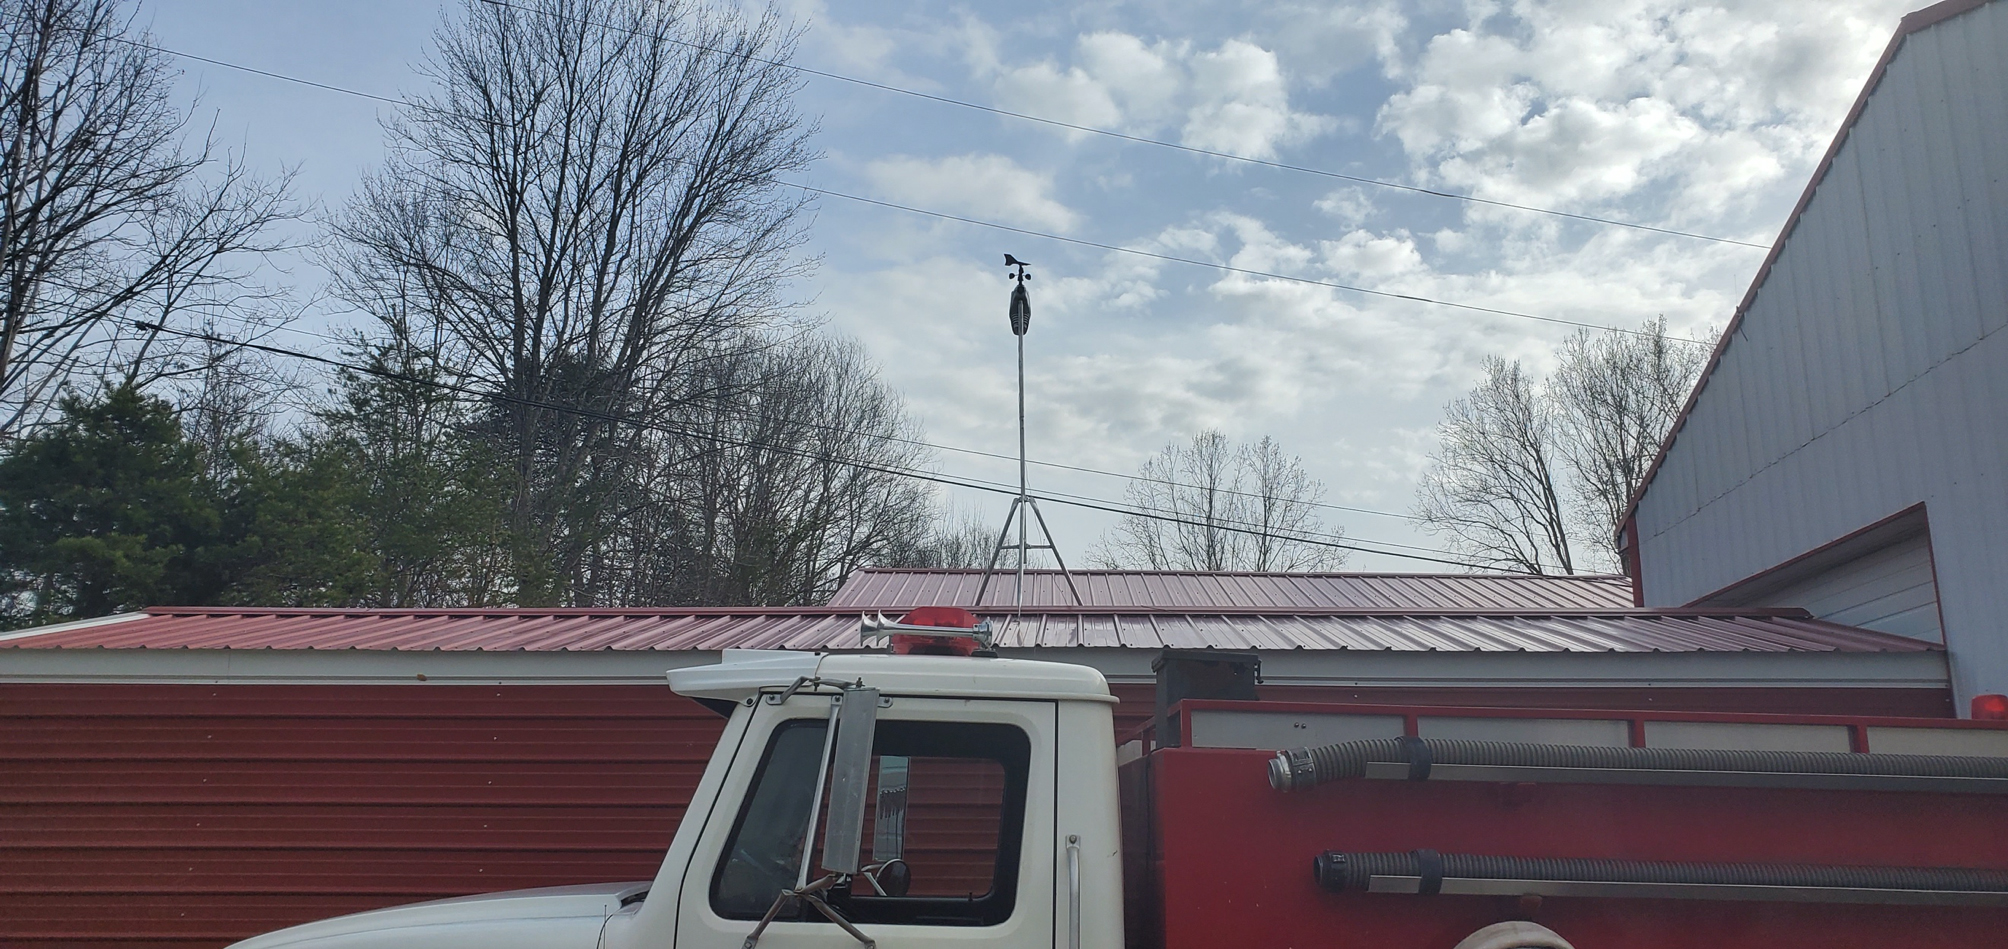 North McCreary Fire Department uses AcuRite Weather Station